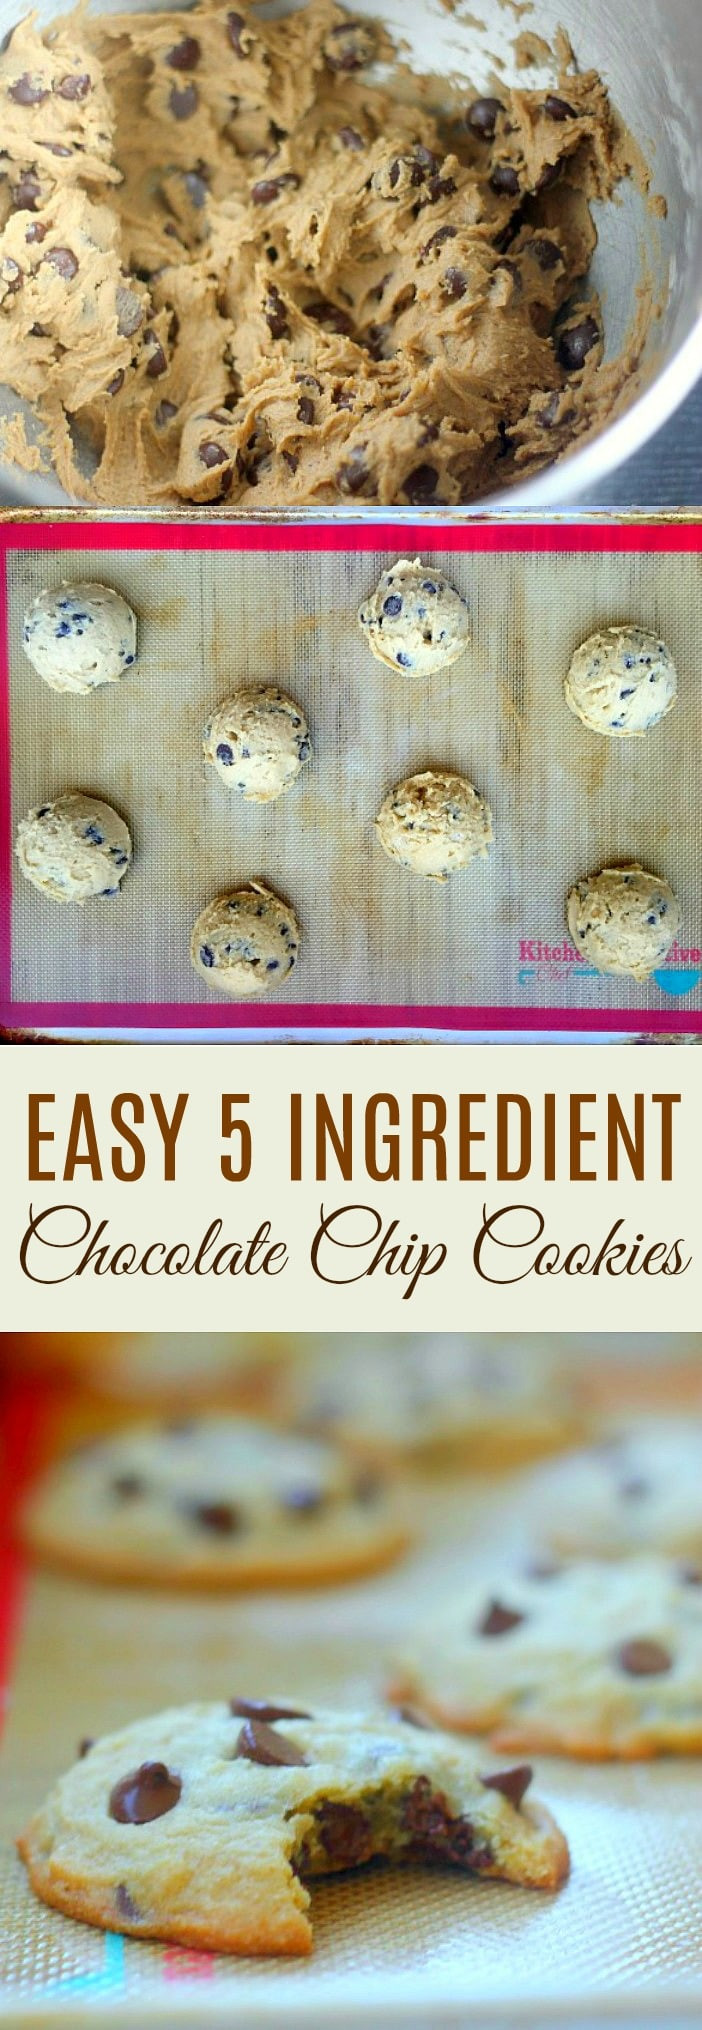 Chocolate Chip Cookie Recipes For Kids
 Easy Chocolate Chip Cookies